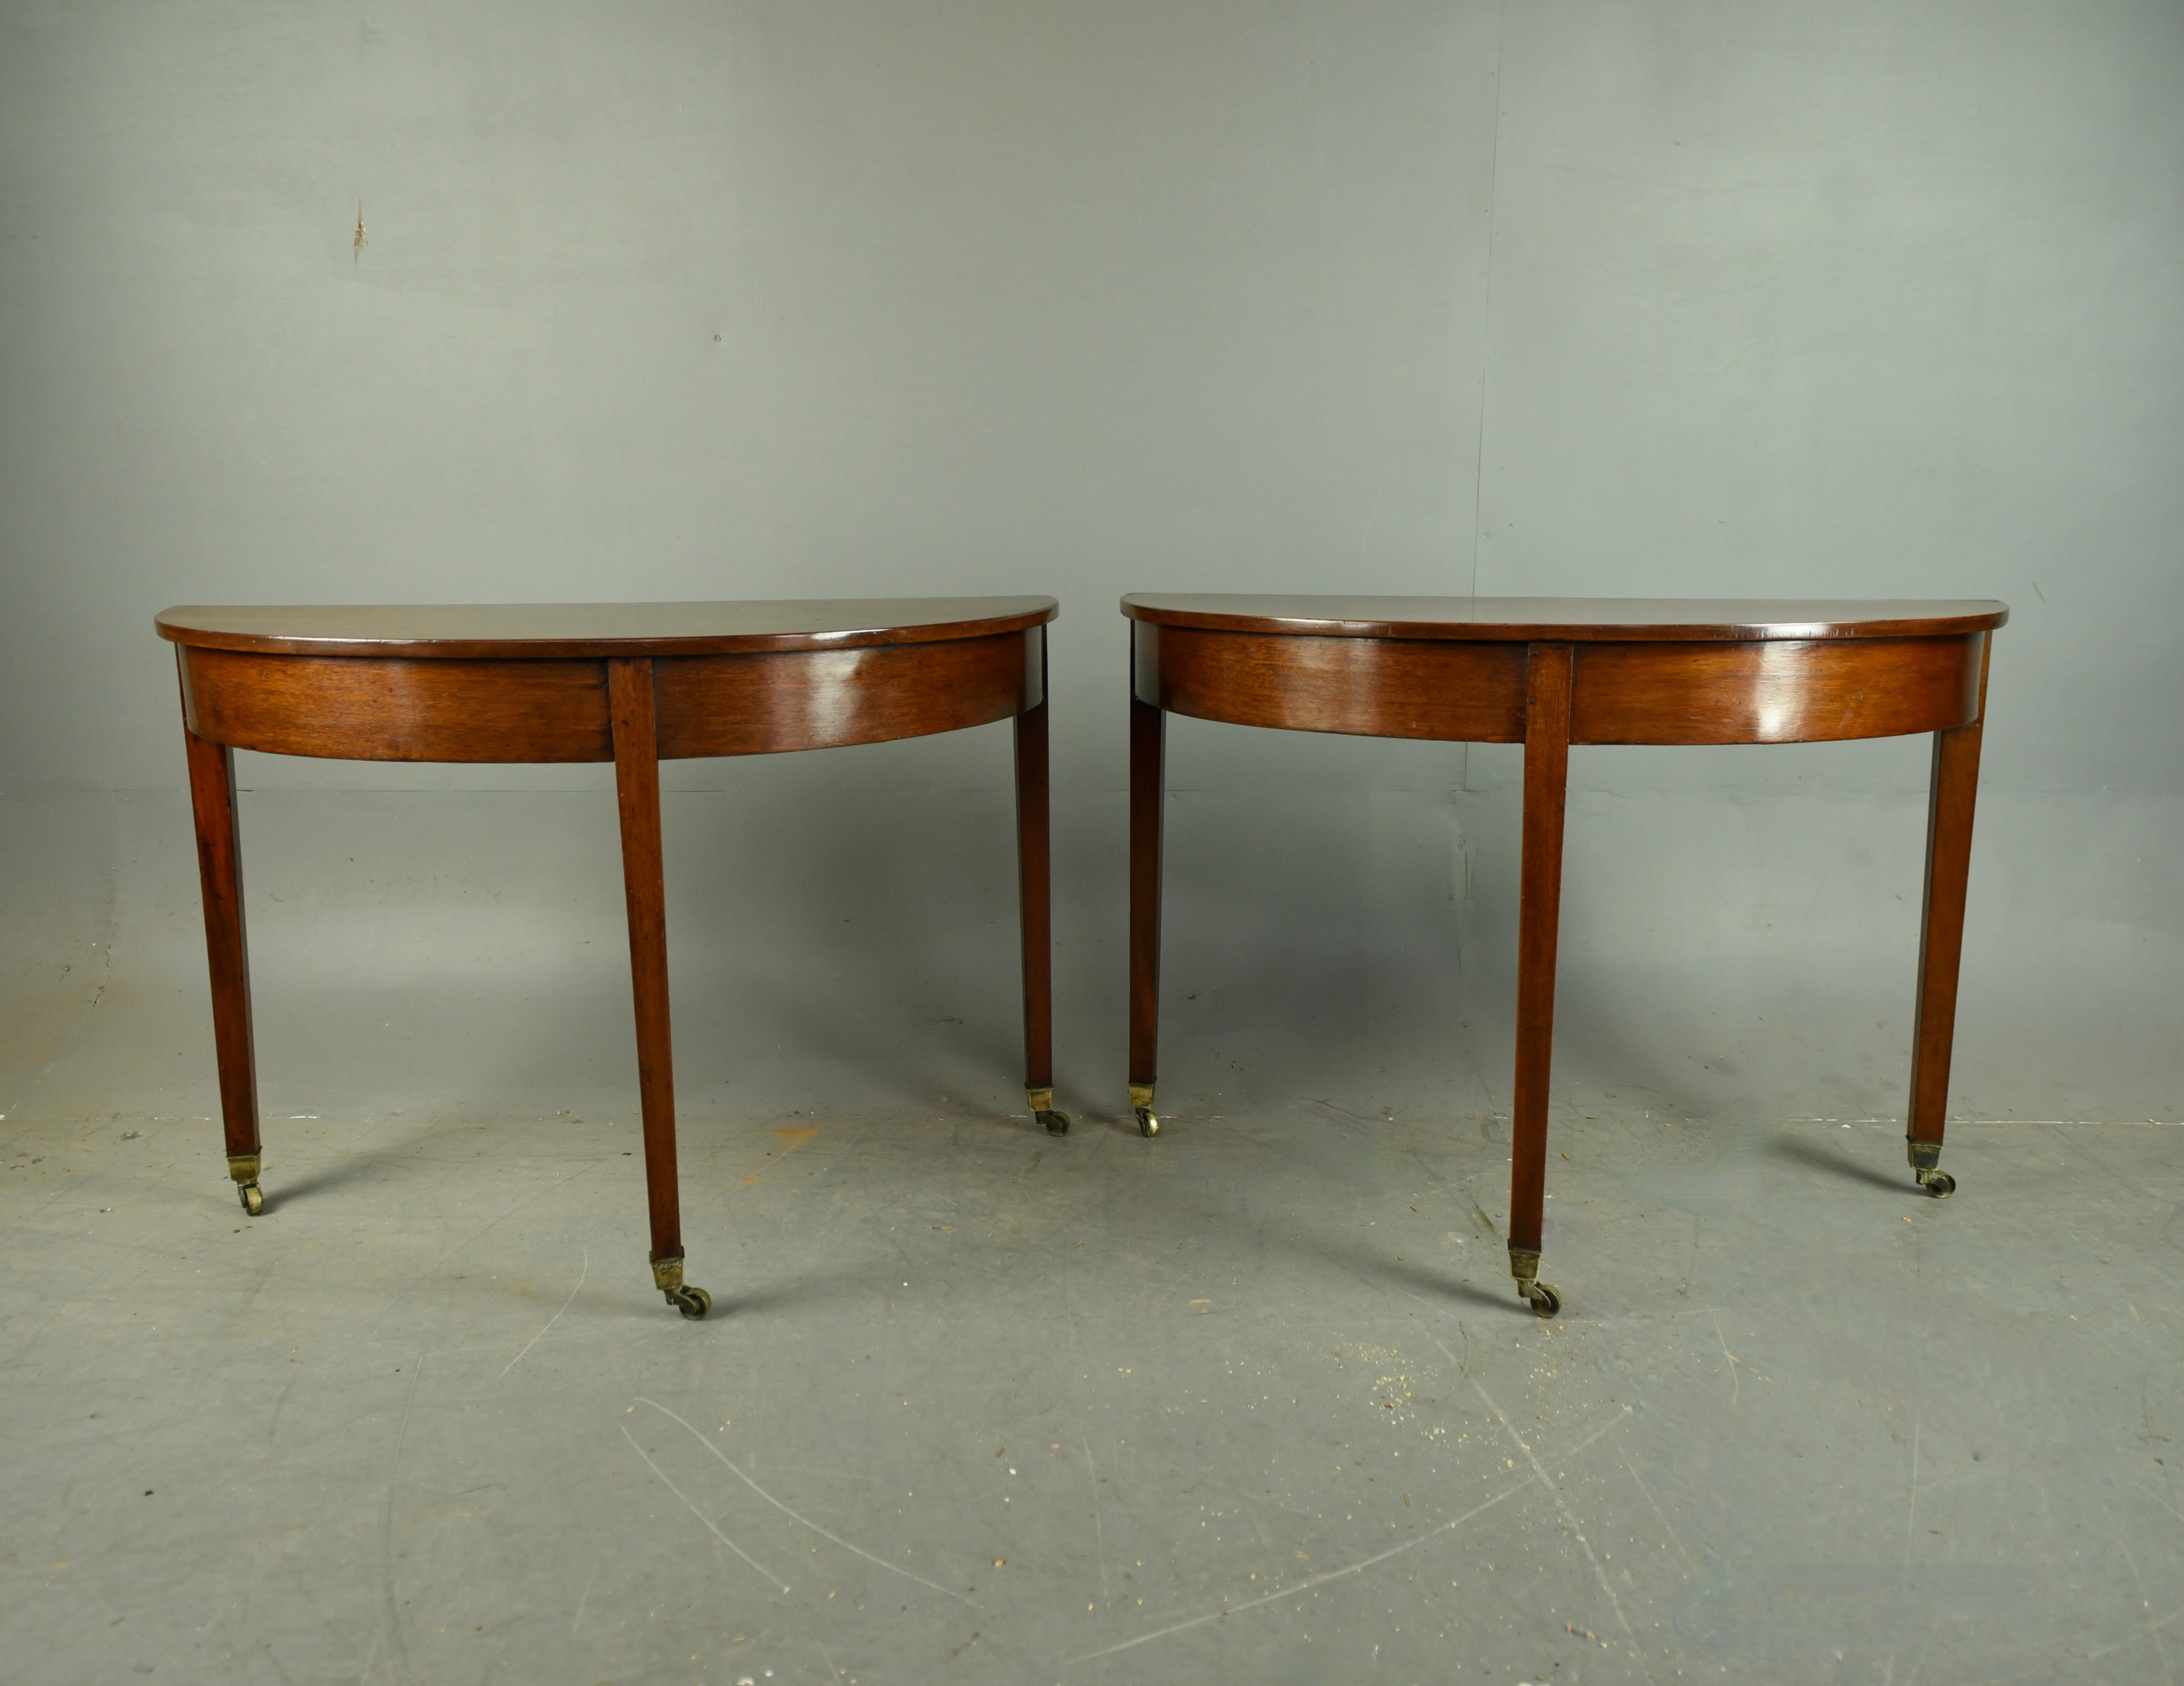 Fine pair of Georgian mahogany console tables circa 1820 .
The console tables are constructed of solid mahogany through with half round tops standing on three very elegant tapered legs terminating with original brass castors .
They are very well